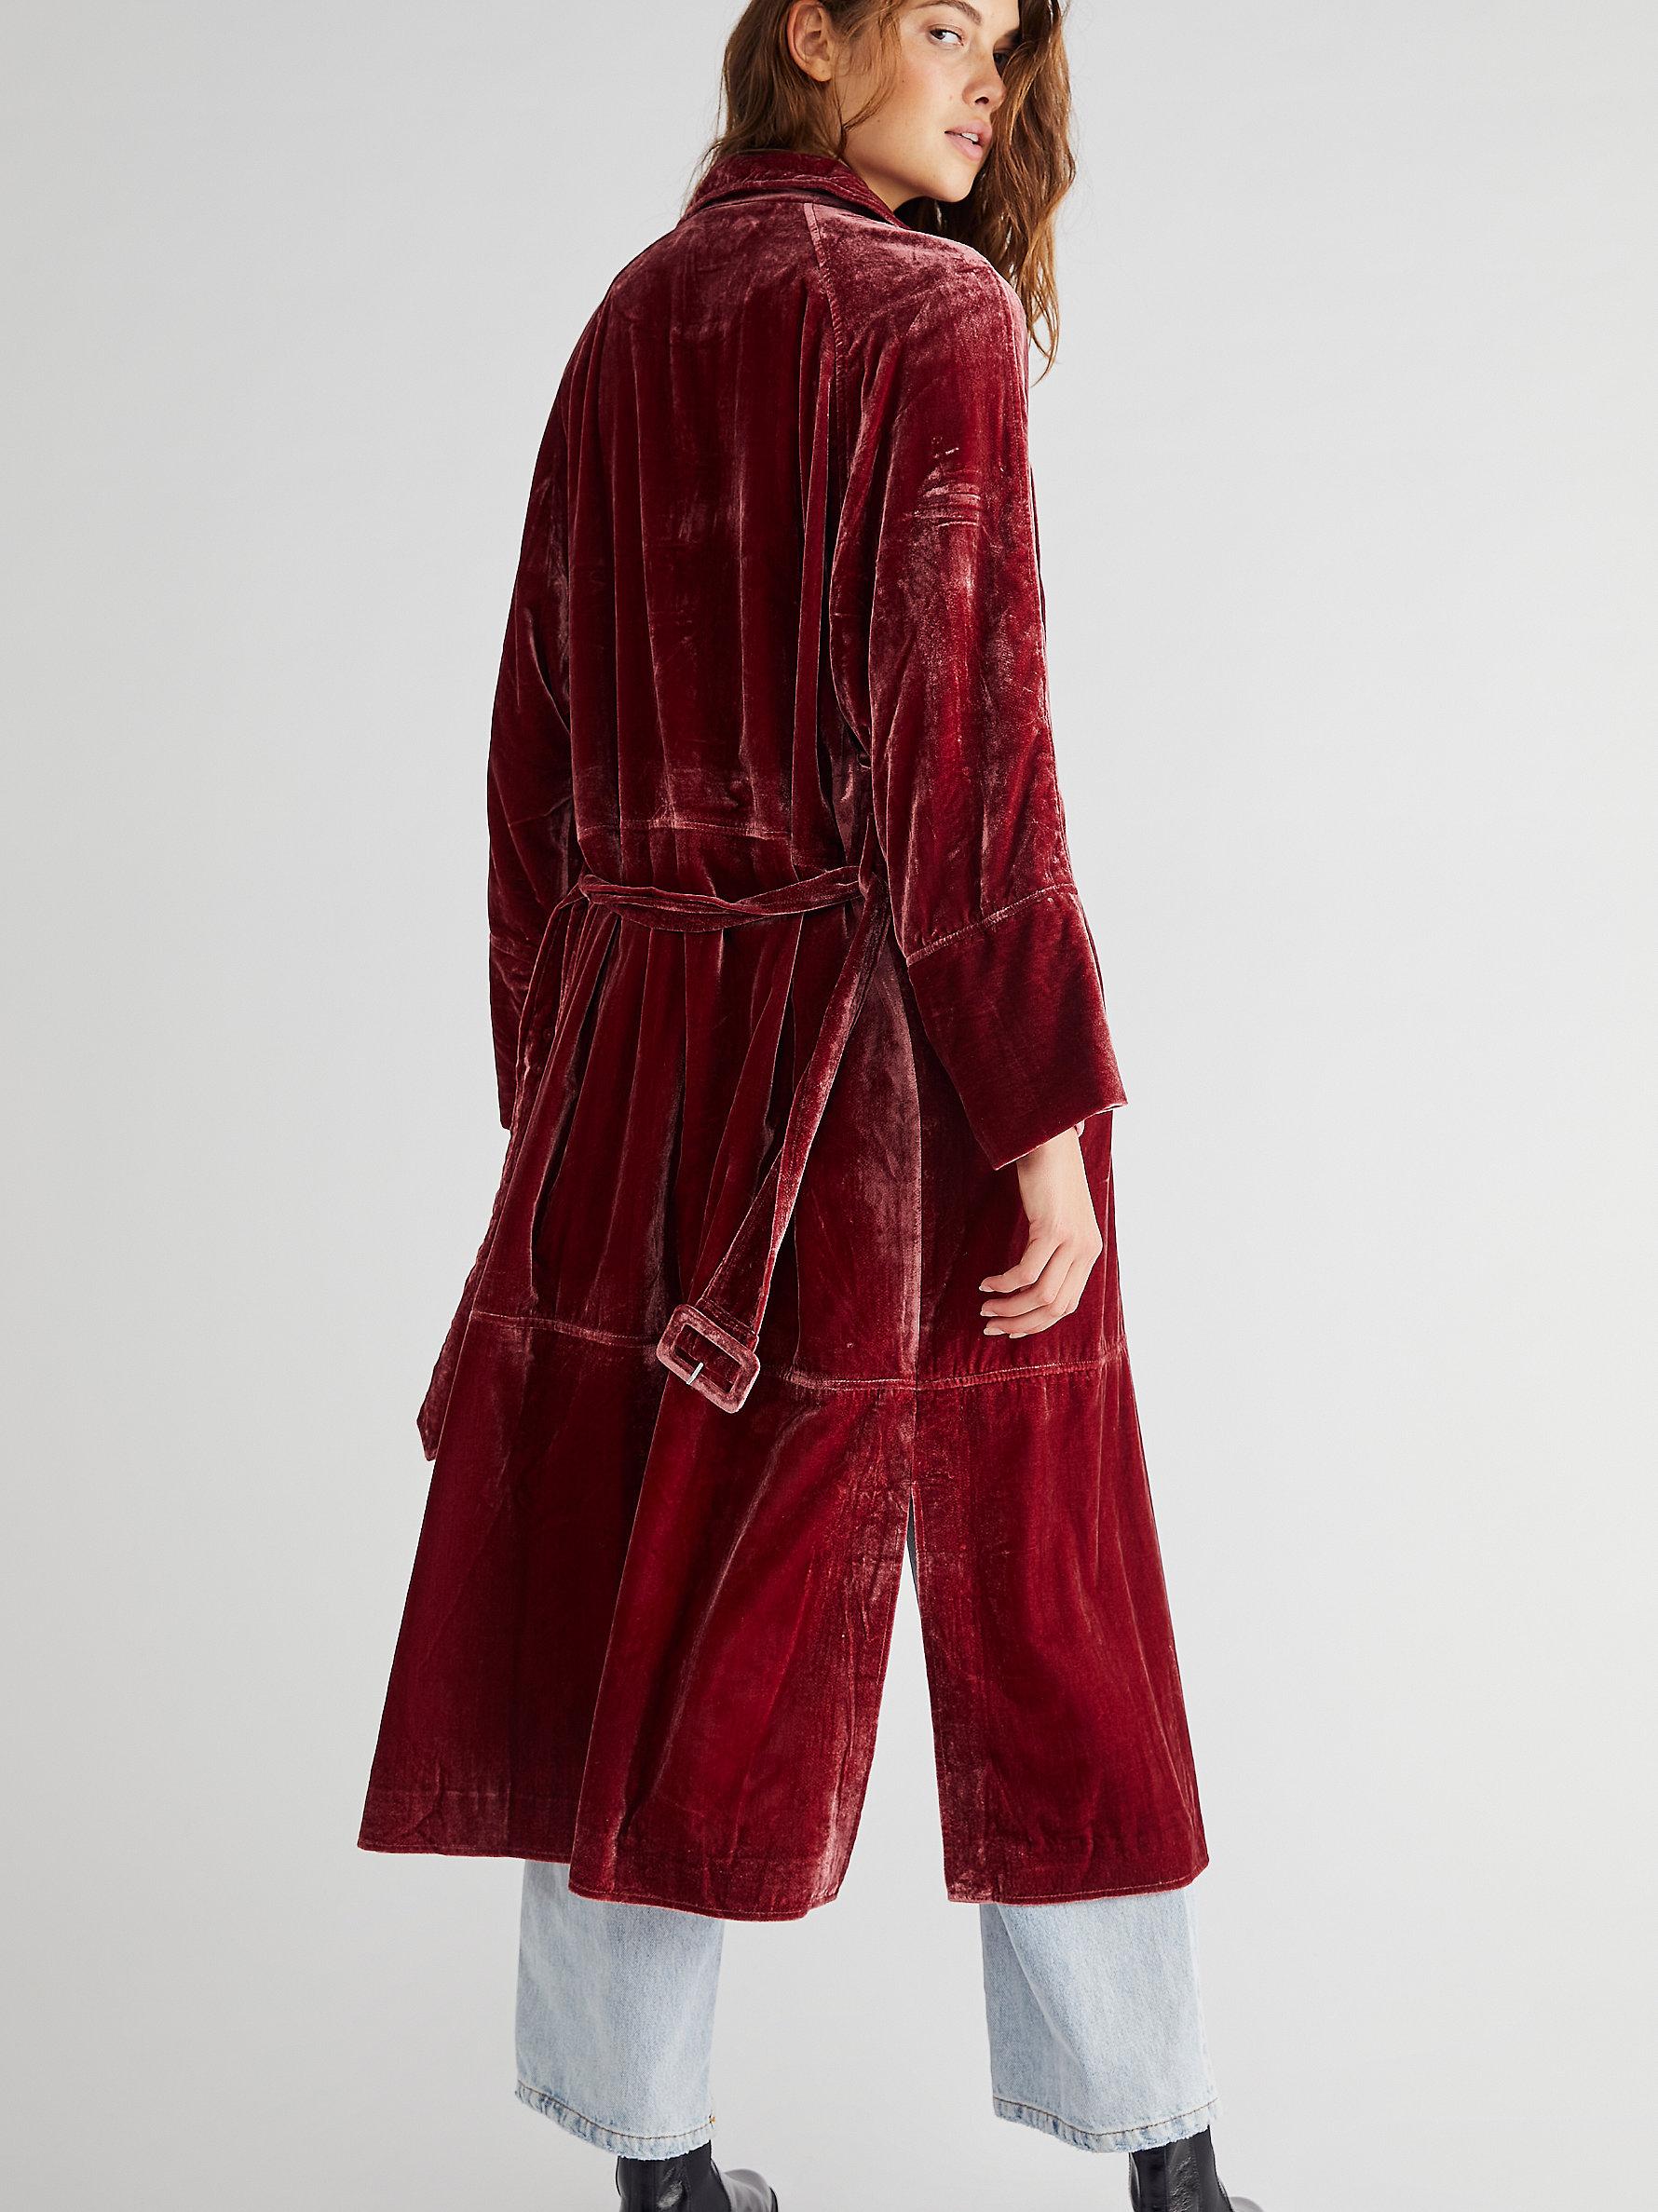 lotus afvisning Manifold Free People Adele Velvet Duster in Red | Lyst